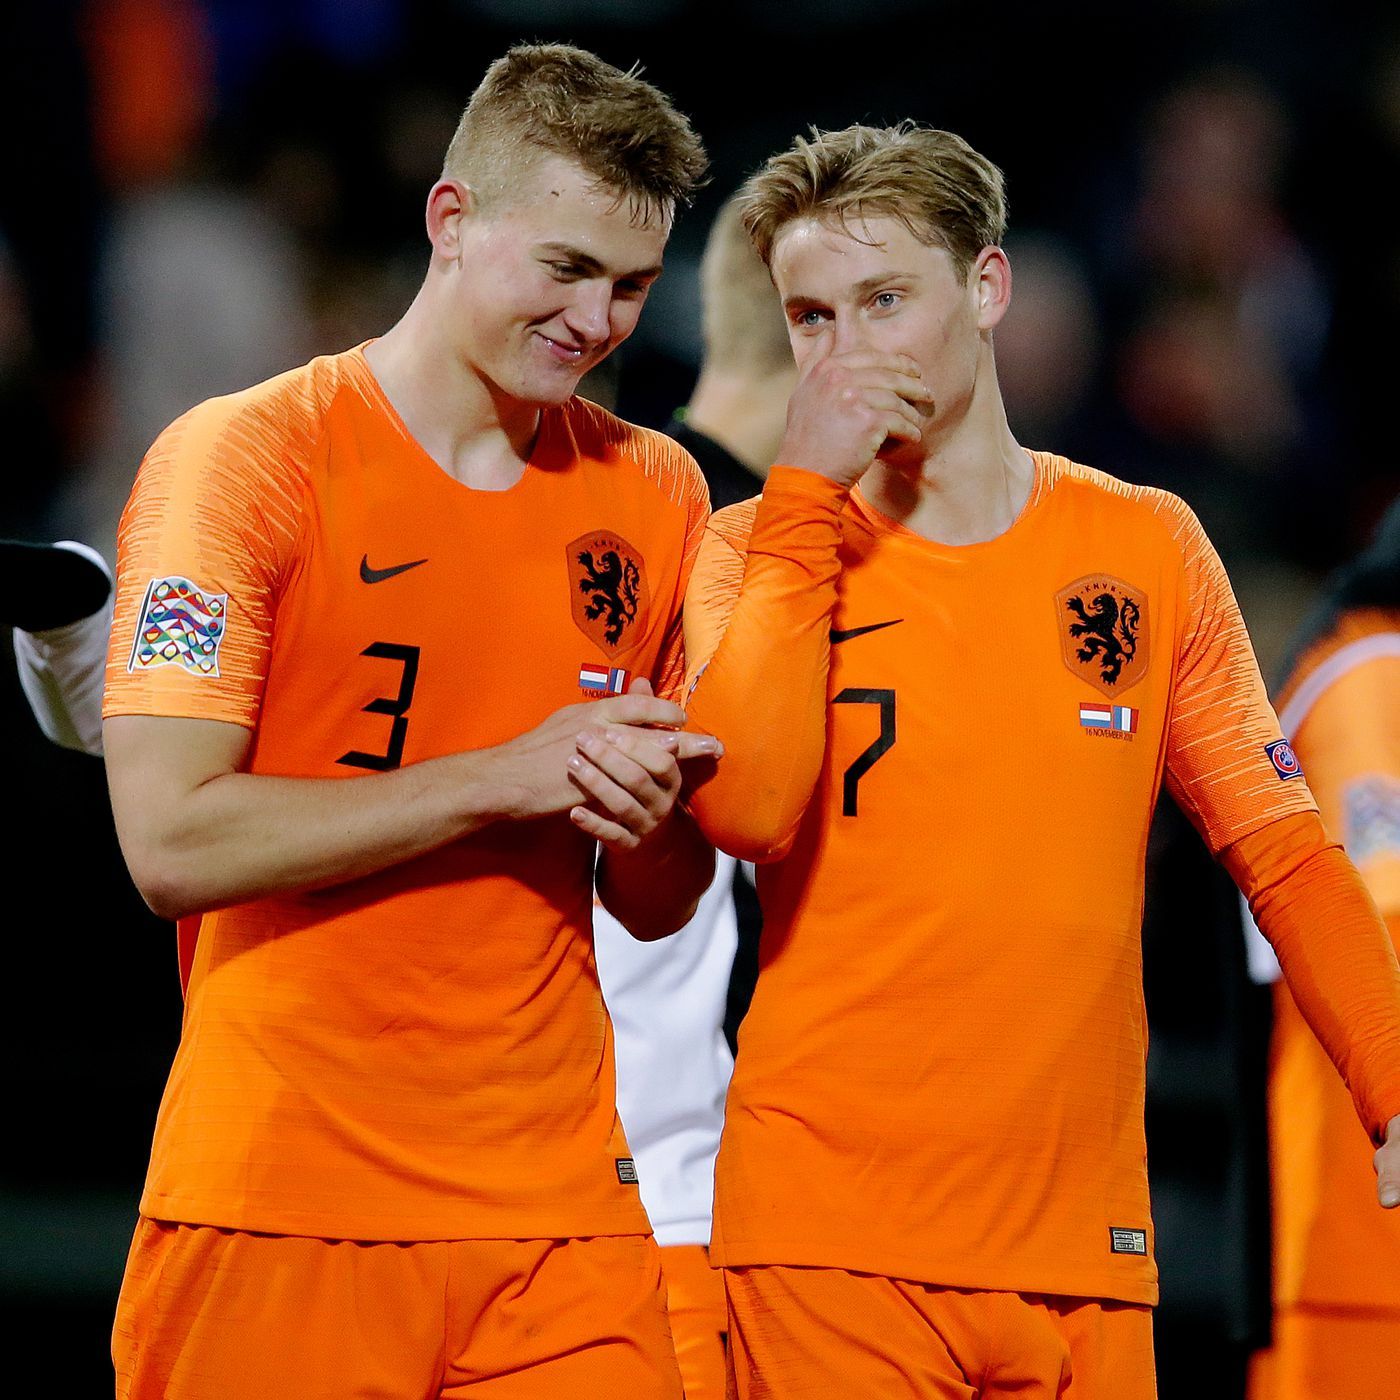 Bayern's potential Ajax raid of Frenkie de Jong and Matthijs de Ligt would be expensive Football Works